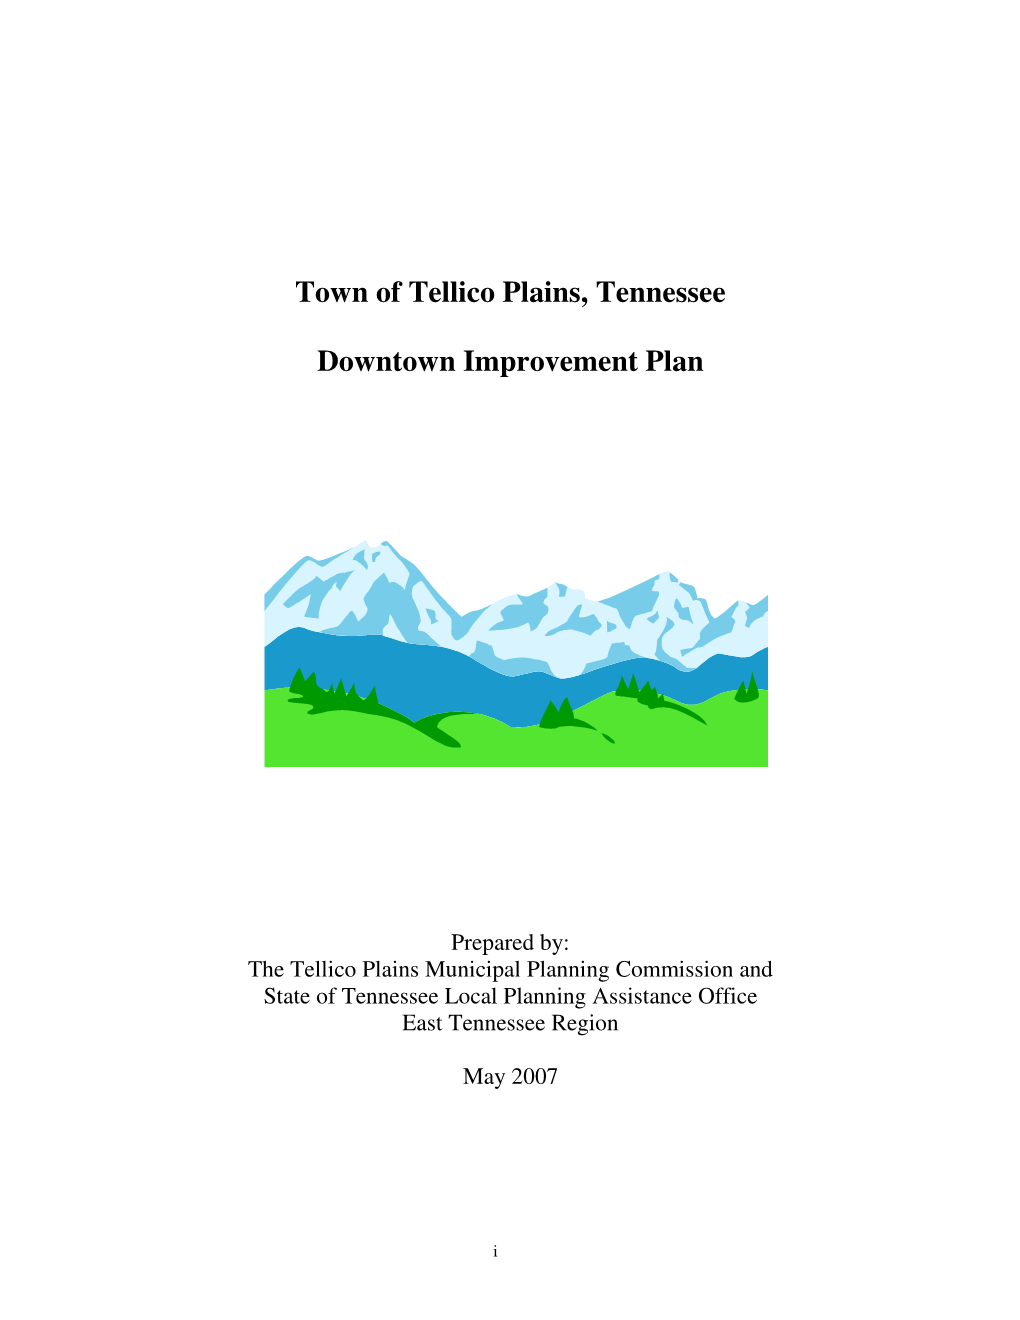 Town of Tellico Plains, Tennessee Downtown Improvement Plan